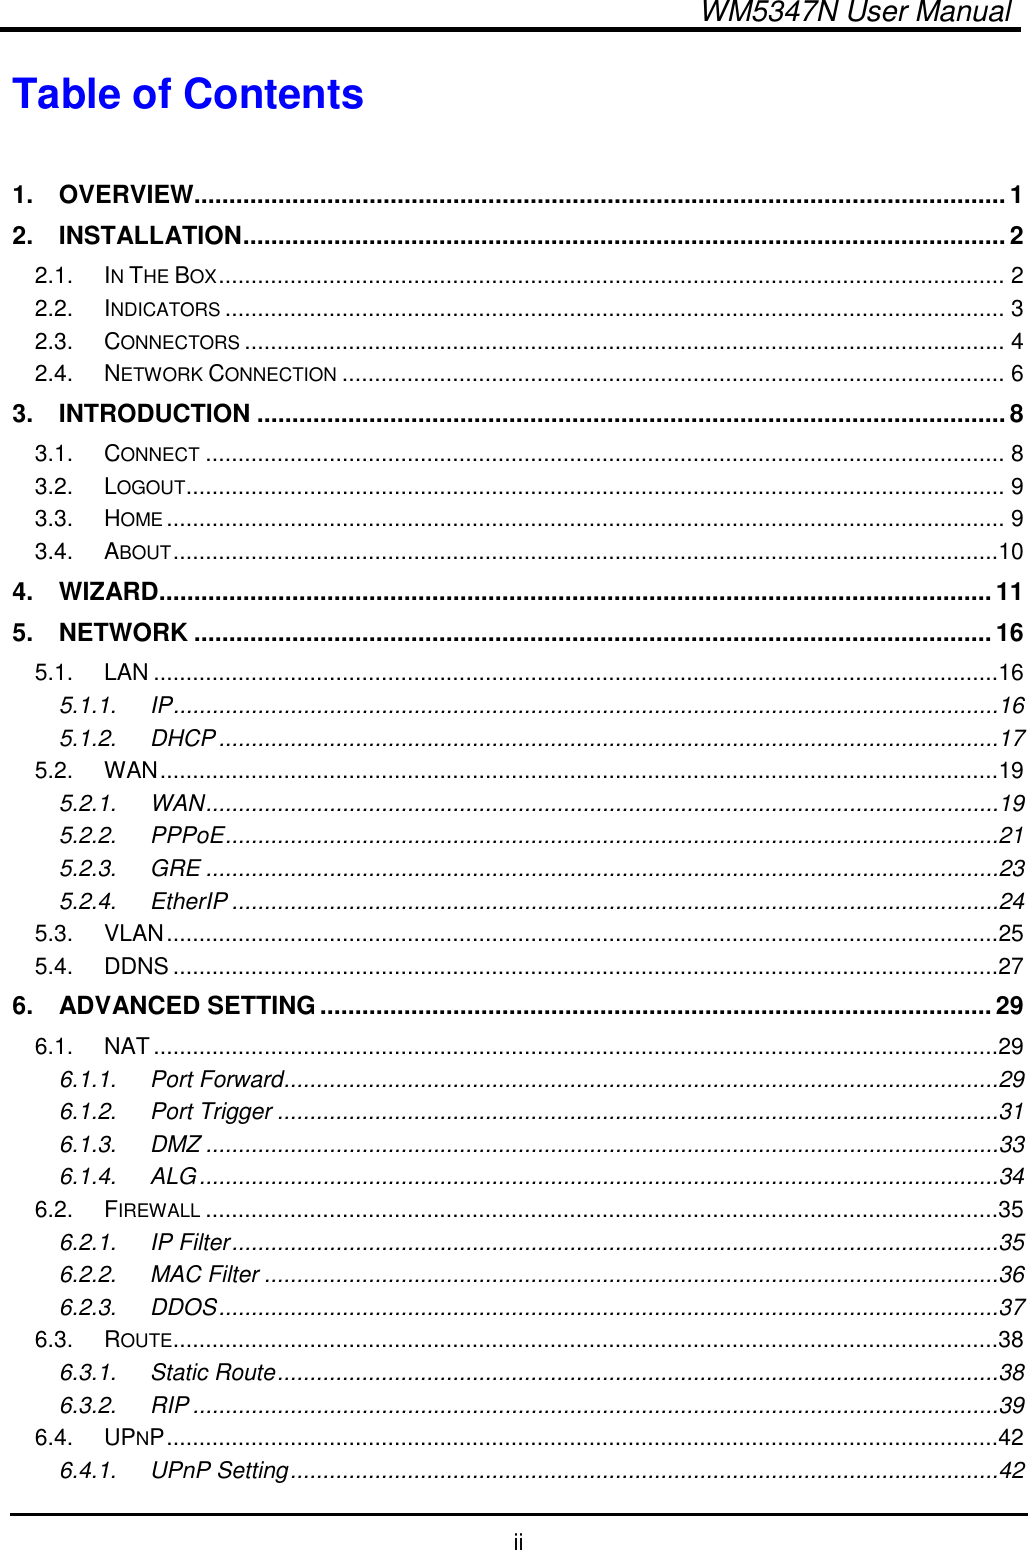   WM5347N User Manual  ii Table of Contents  1. OVERVIEW....................................................................................................................1 2. INSTALLATION.............................................................................................................2 2.1. IN THE BOX......................................................................................................................... 2 2.2. INDICATORS........................................................................................................................ 3 2.3. CONNECTORS..................................................................................................................... 4 2.4. NETWORK CONNECTION...................................................................................................... 6 3. INTRODUCTION ...........................................................................................................8 3.1. CONNECT........................................................................................................................... 8 3.2. LOGOUT.............................................................................................................................. 9 3.3. HOME................................................................................................................................. 9 3.4. ABOUT...............................................................................................................................10 4. WIZARD.......................................................................................................................11 5. NETWORK ..................................................................................................................16 5.1. LAN ..................................................................................................................................16 5.1.1. IP...............................................................................................................................16 5.1.2. DHCP........................................................................................................................17 5.2. WAN.................................................................................................................................19 5.2.1. WAN..........................................................................................................................19 5.2.2. PPPoE.......................................................................................................................21 5.2.3. GRE ..........................................................................................................................23 5.2.4. EtherIP ......................................................................................................................24 5.3. VLAN................................................................................................................................25 5.4. DDNS ...............................................................................................................................27 6. ADVANCED SETTING................................................................................................29 6.1. NAT..................................................................................................................................29 6.1.1. Port Forward..............................................................................................................29 6.1.2. Port Trigger ...............................................................................................................31 6.1.3. DMZ ..........................................................................................................................33 6.1.4. ALG...........................................................................................................................34 6.2. FIREWALL..........................................................................................................................35 6.2.1. IP Filter......................................................................................................................35 6.2.2. MAC Filter .................................................................................................................36 6.2.3. DDOS........................................................................................................................37 6.3. ROUTE...............................................................................................................................38 6.3.1. Static Route...............................................................................................................38 6.3.2. RIP ............................................................................................................................39 6.4. UPNP................................................................................................................................42 6.4.1. UPnP Setting.............................................................................................................42 